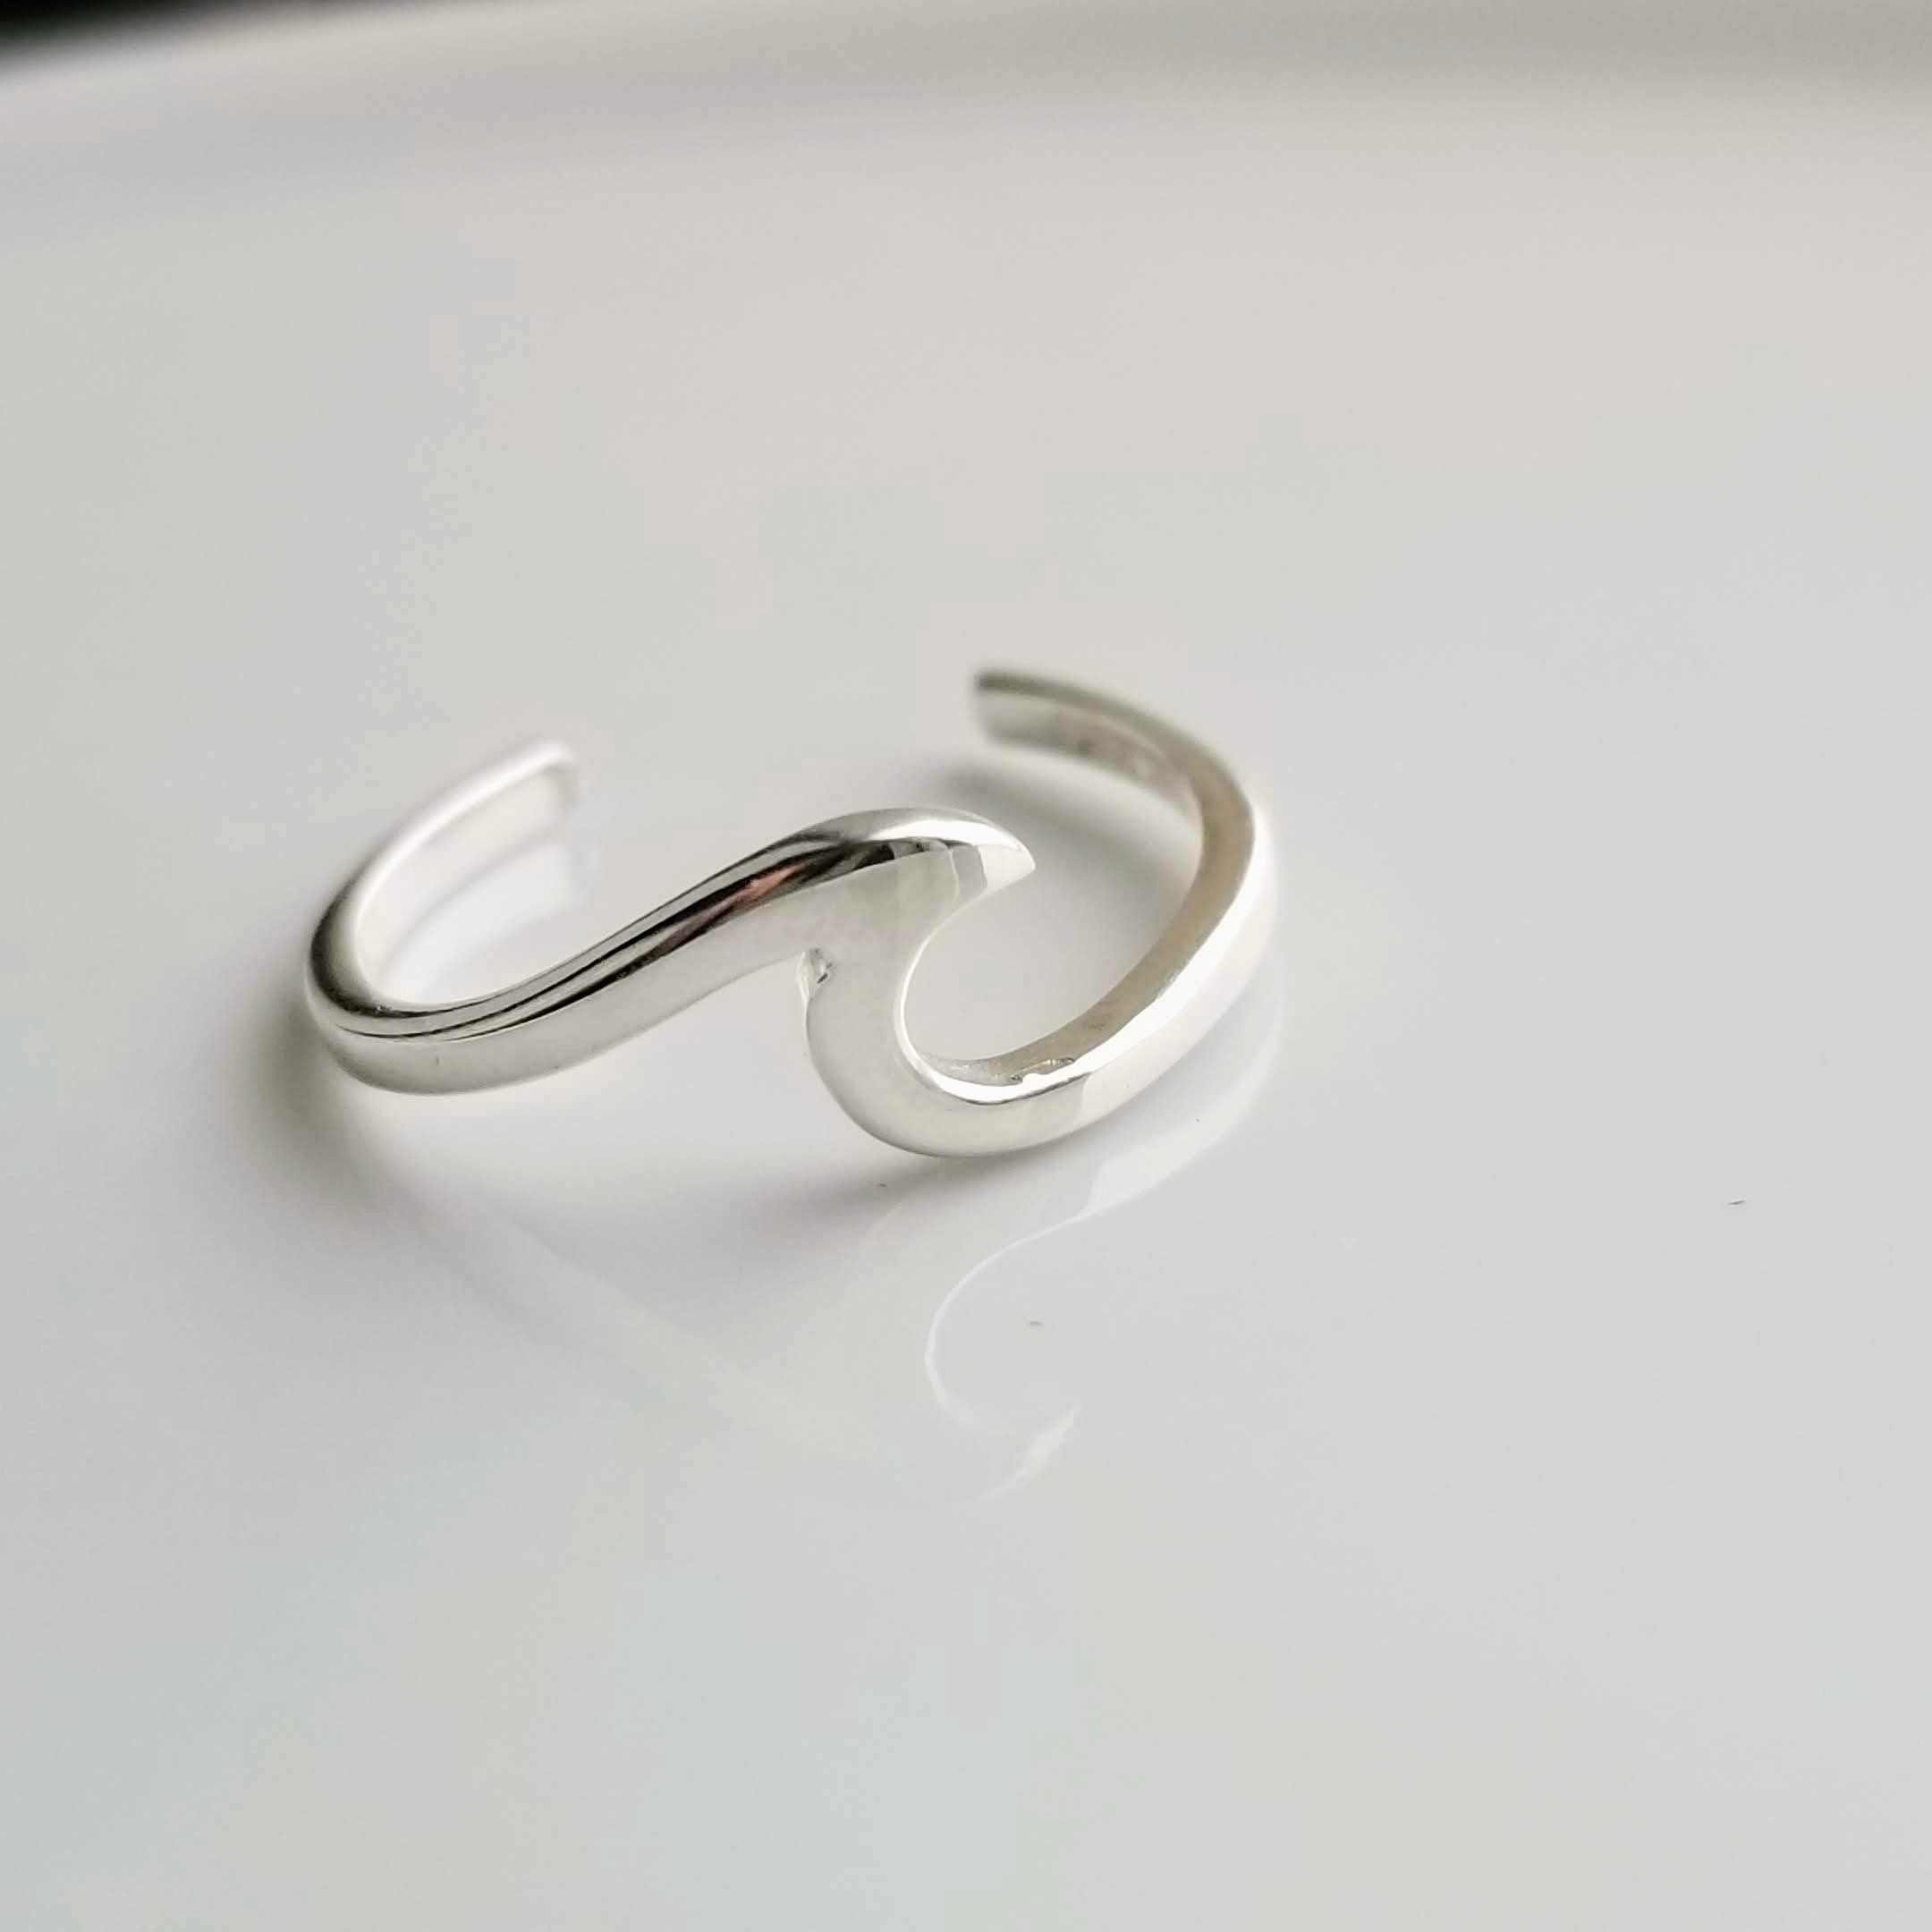 Wave Silver Toe Ring Pinky Ring Toe Ring Summer Toe Ring - Etsy